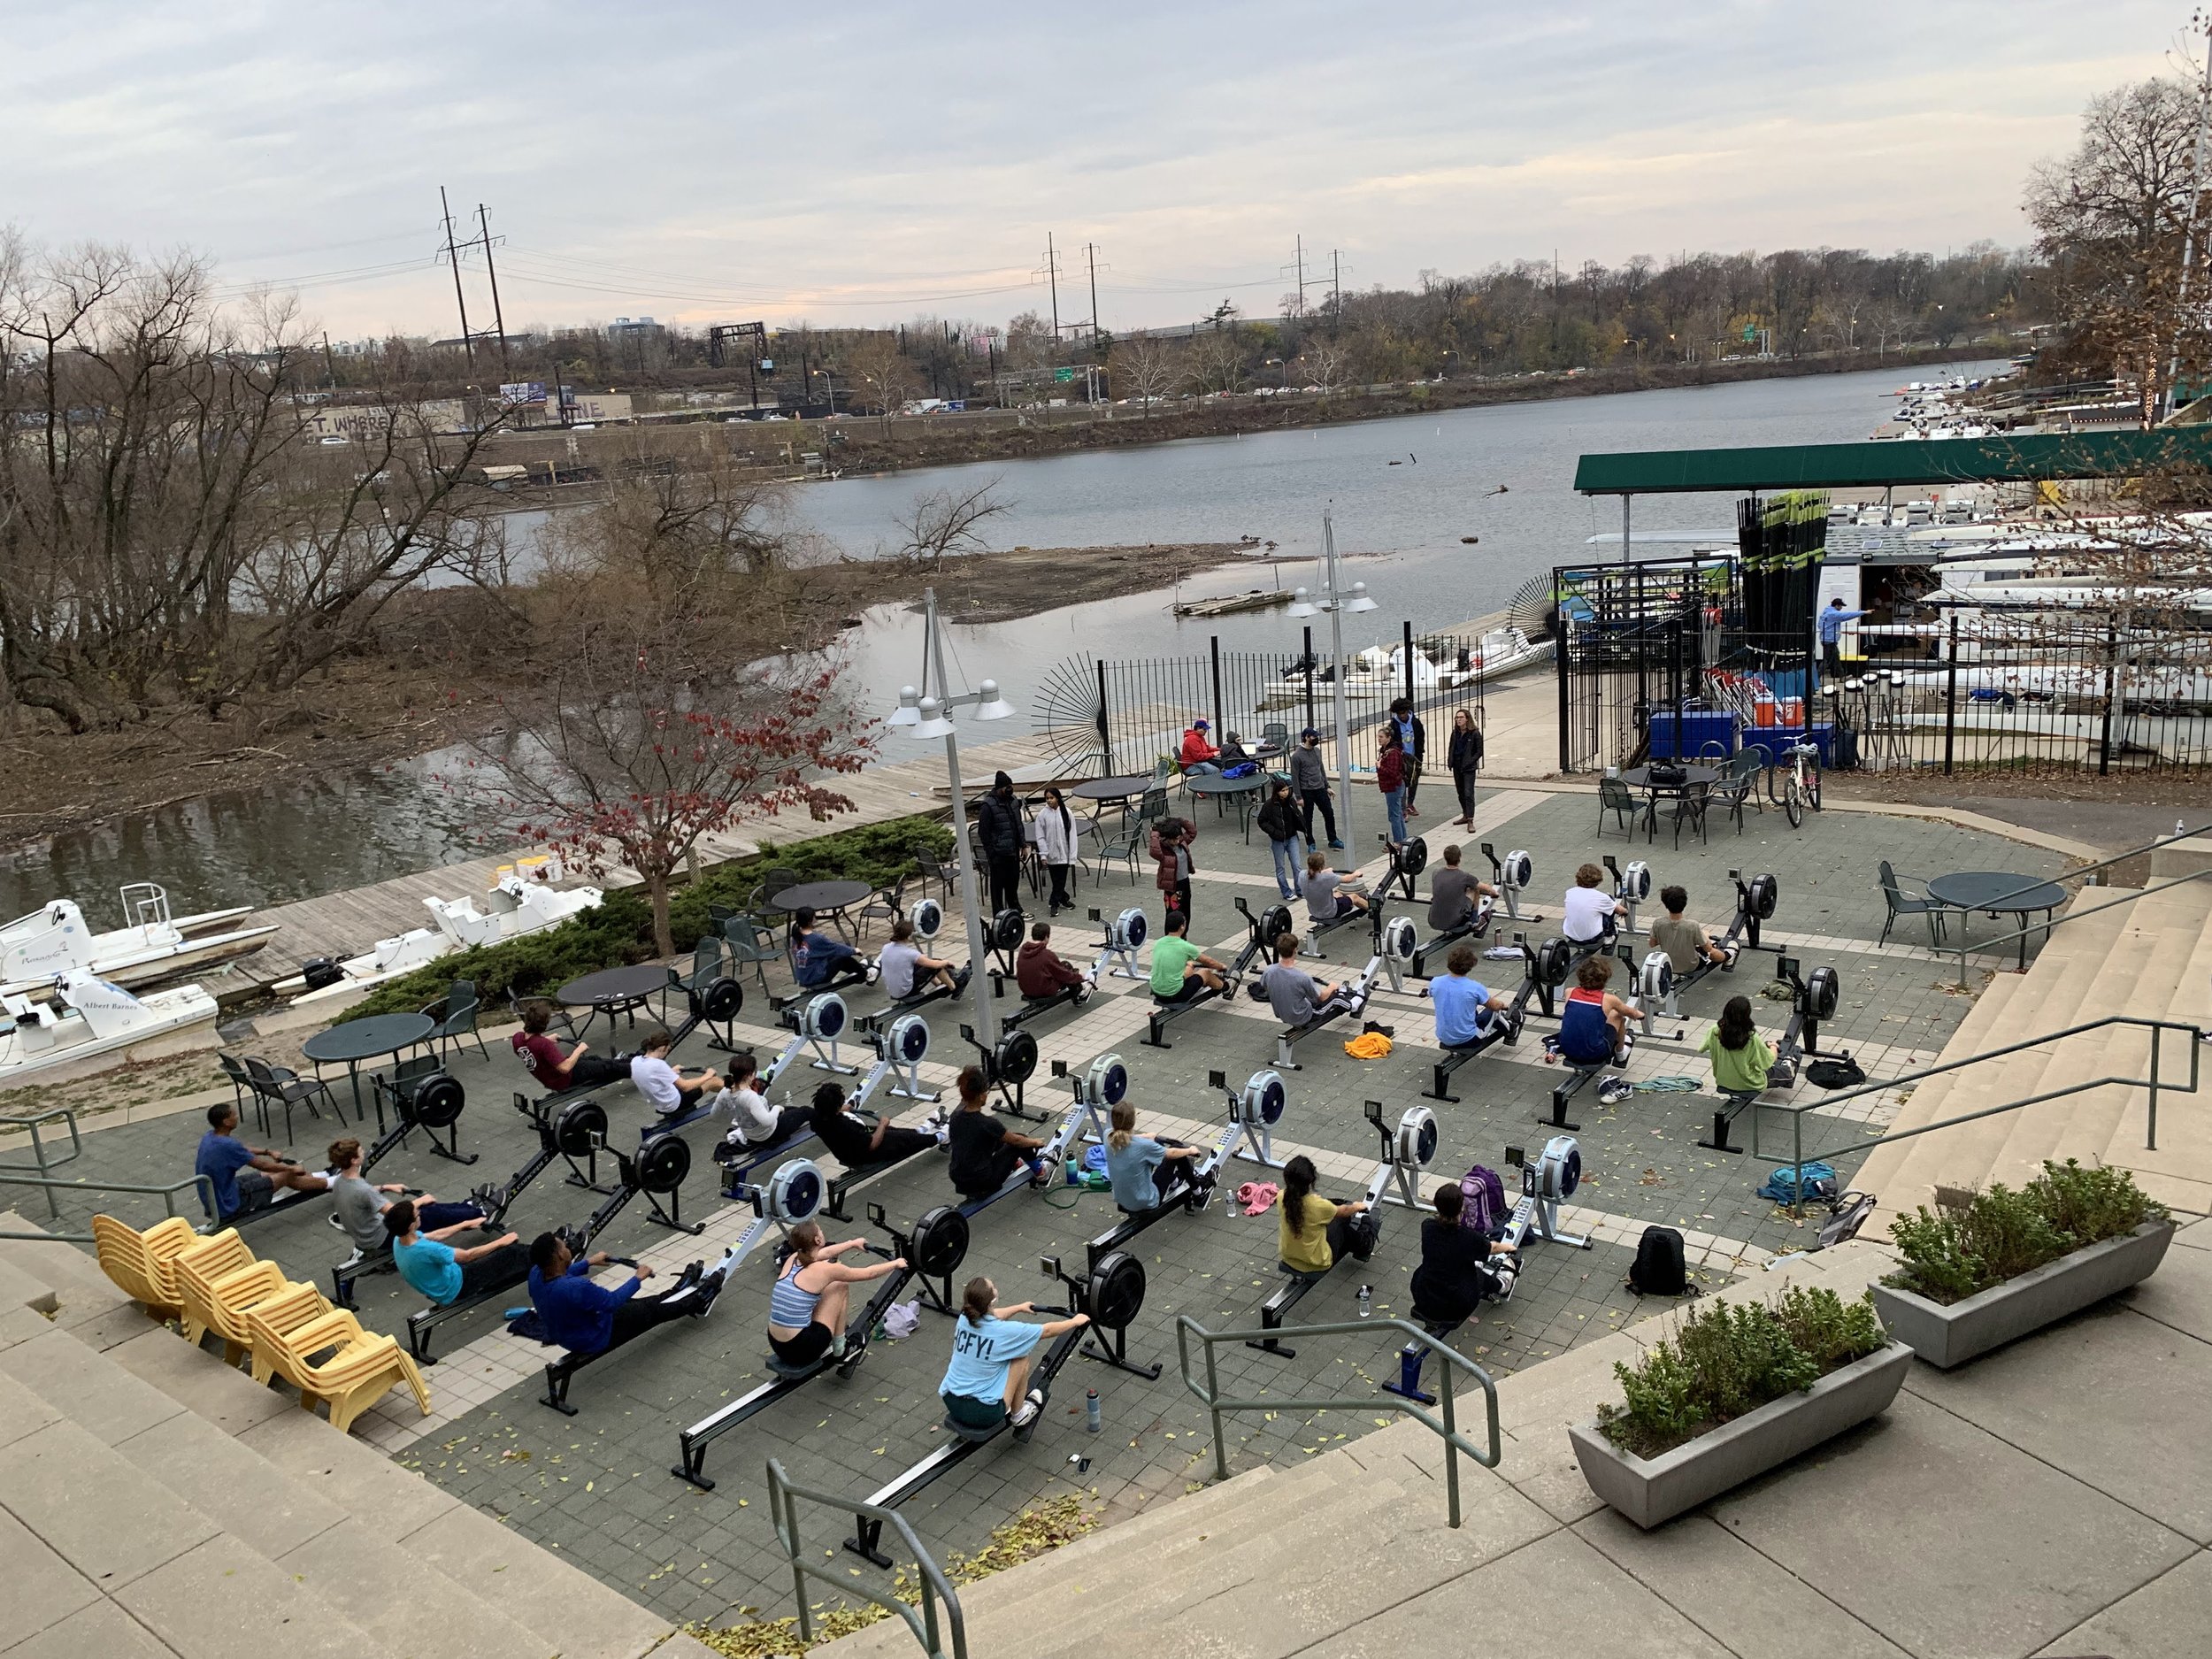  Located at #1 Boathouse Row, PCR doesn’t currently have a boathouse. All programming is run outdoors. 